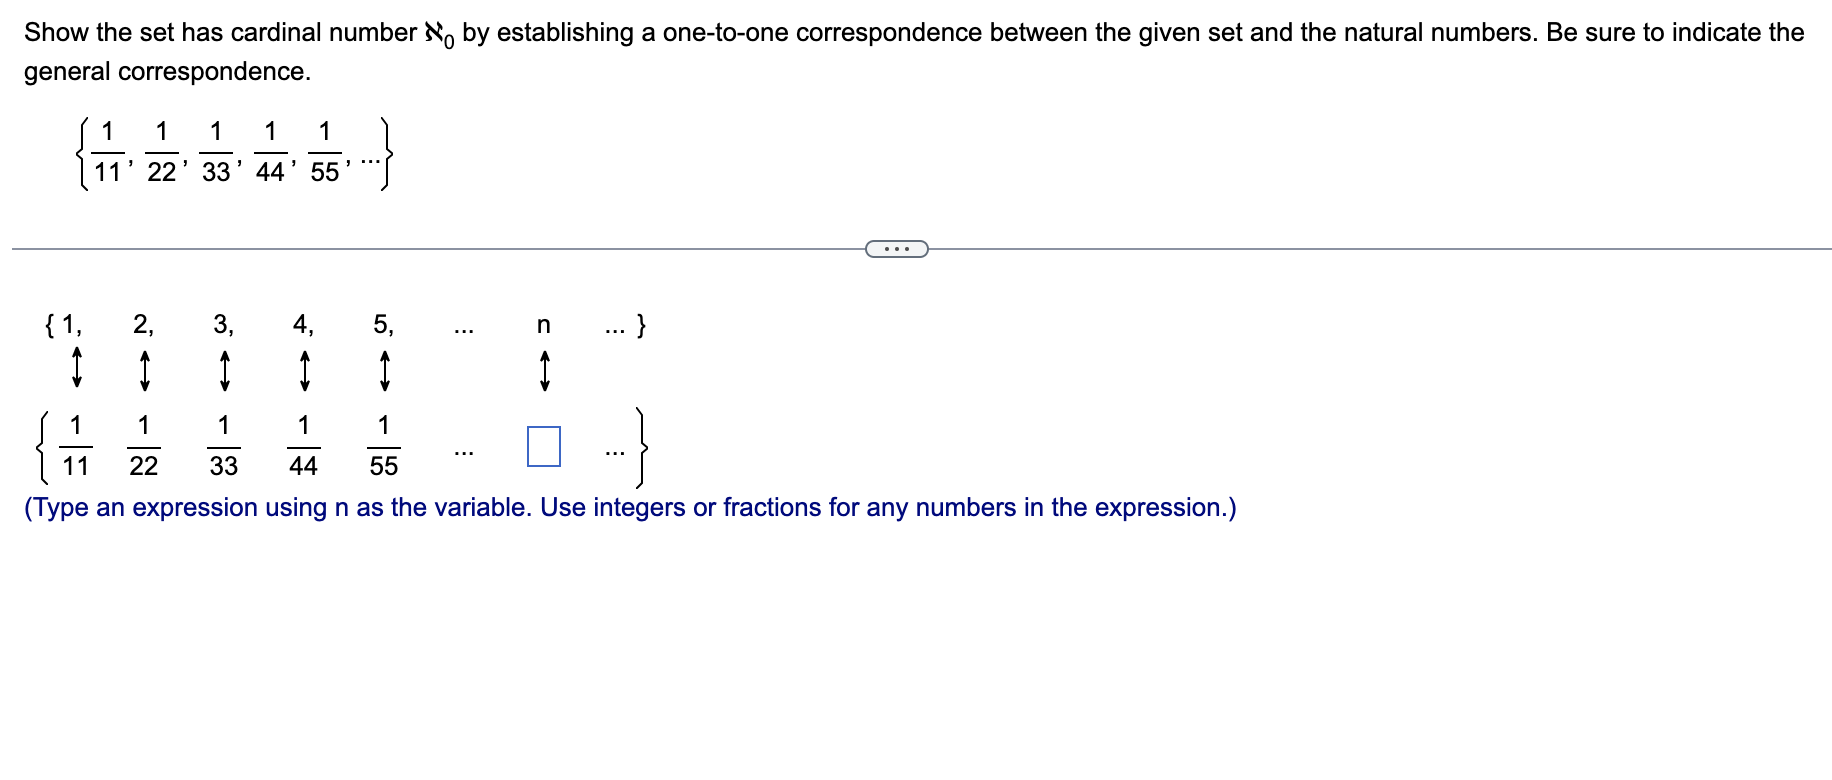 Information about the correspondence between the number and type